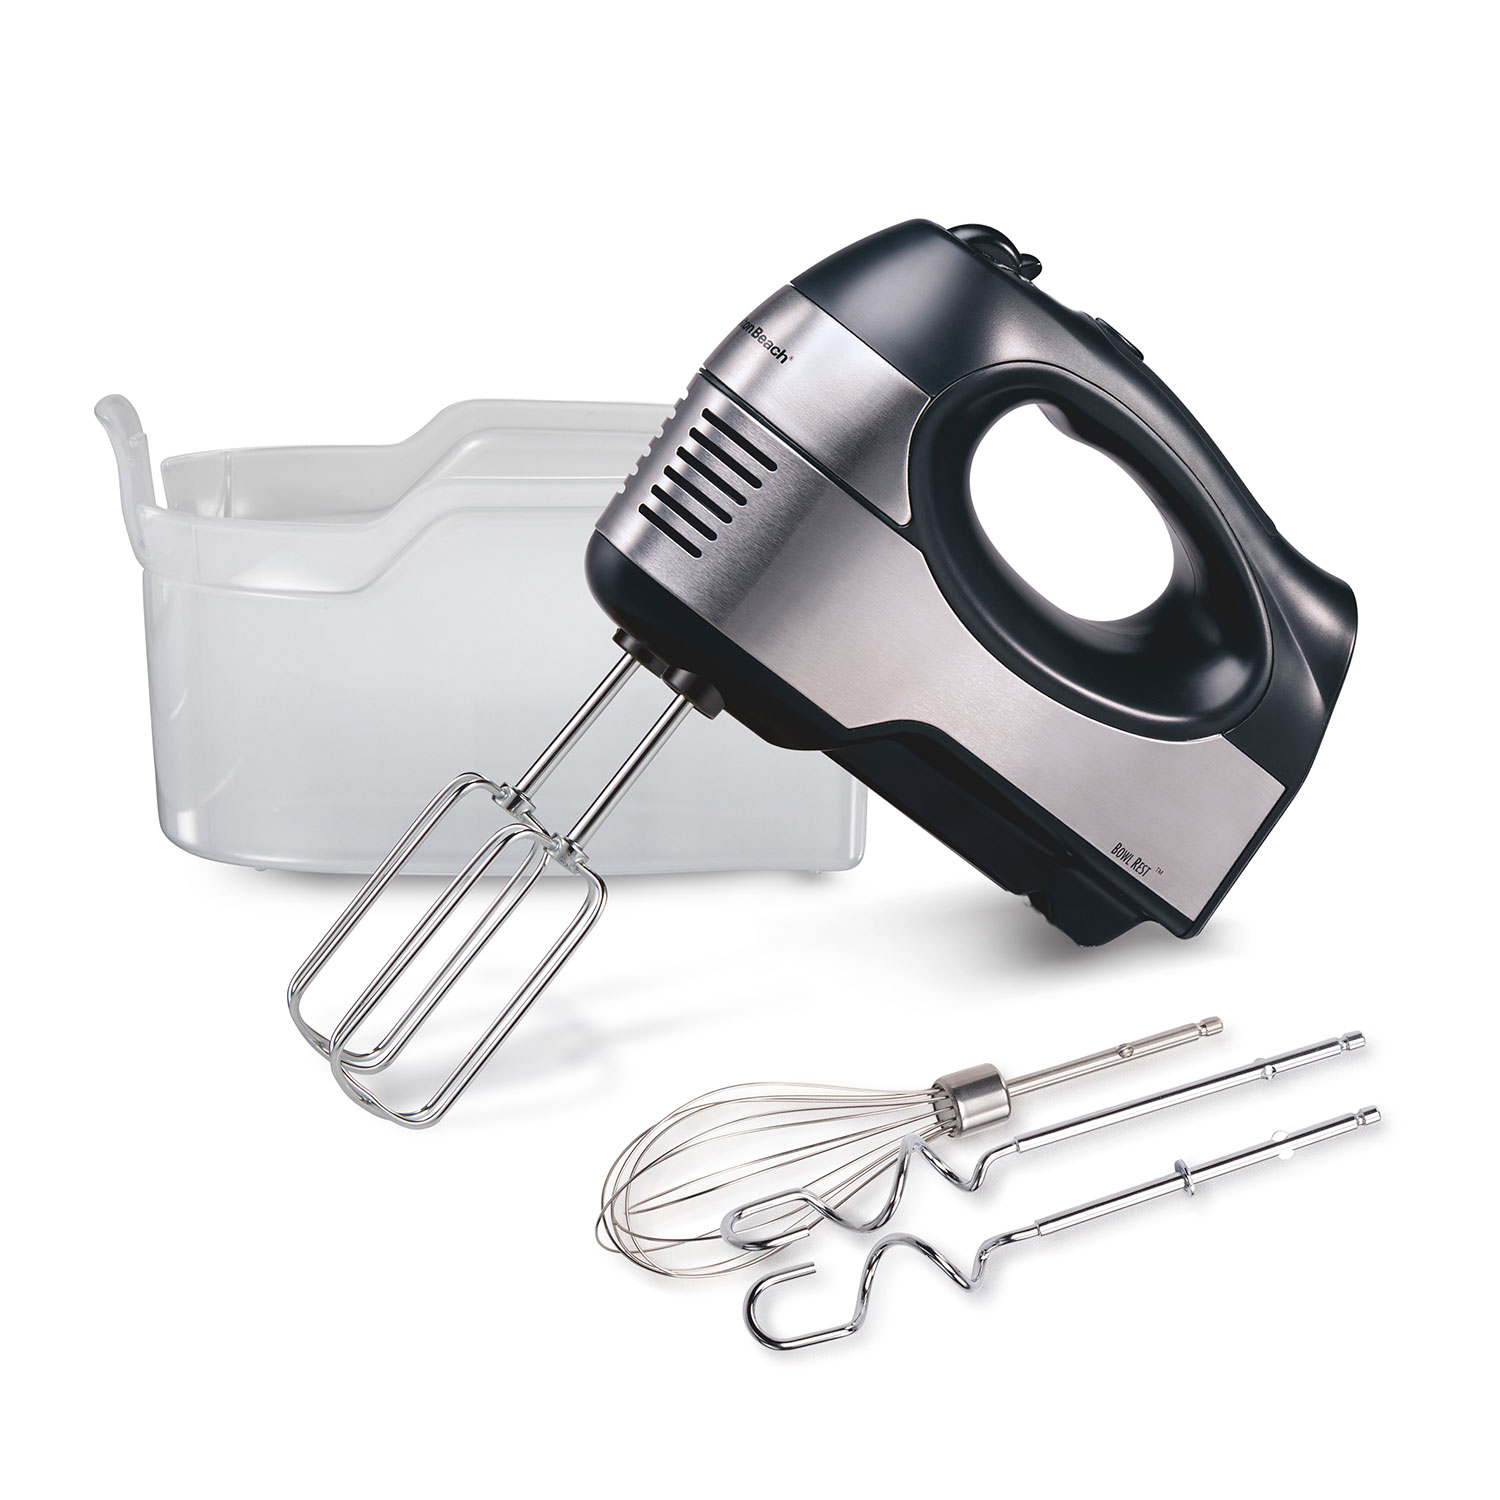 6 Speed Performance Hand Mixer with Case and Attachments (62646F)